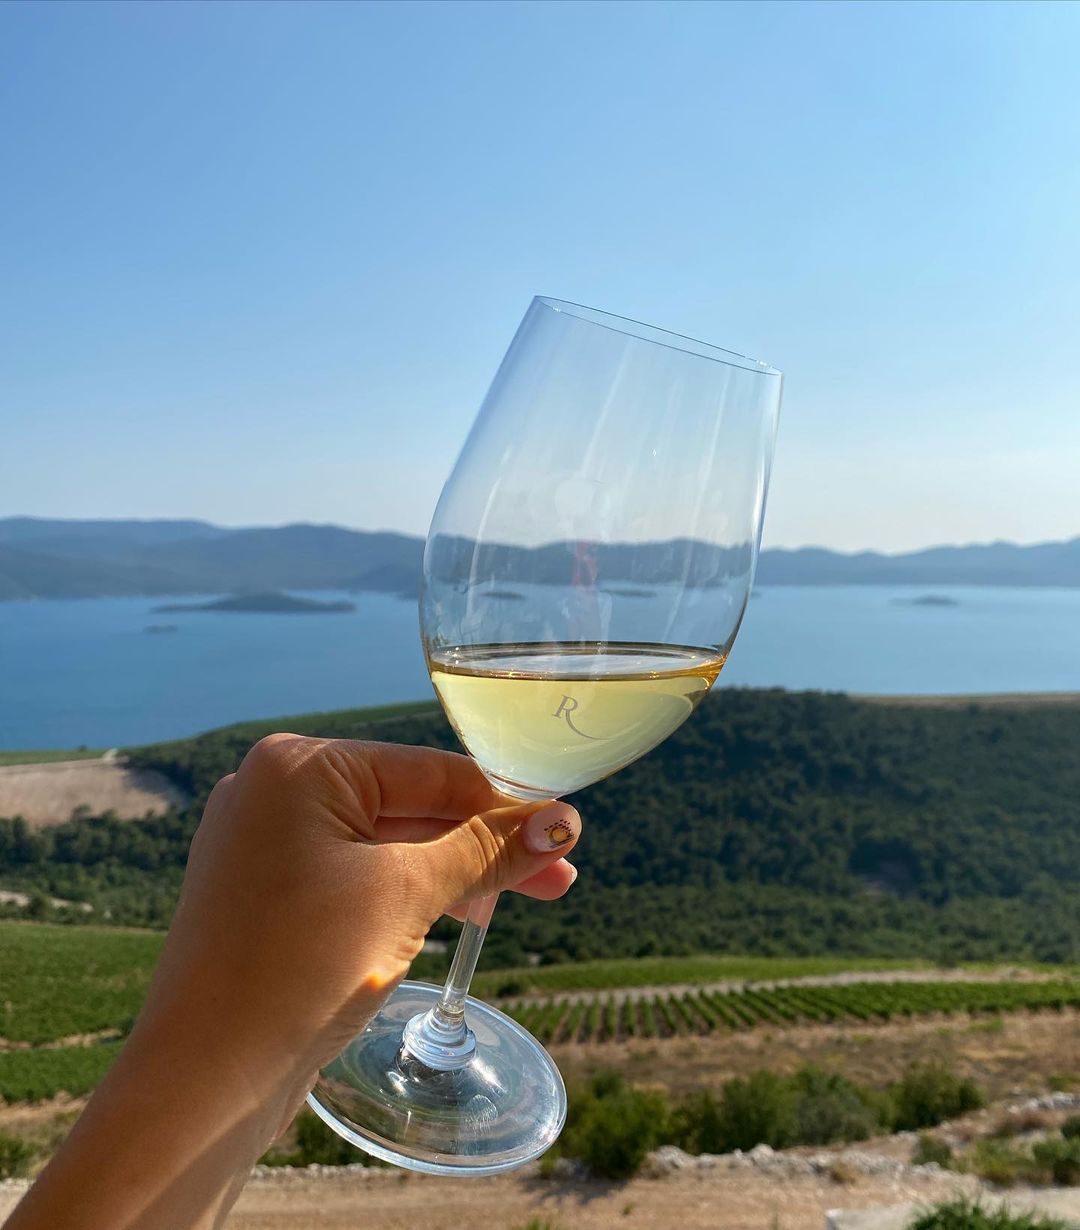 A raised glass to the beauty of the Croatian Adriatic sea